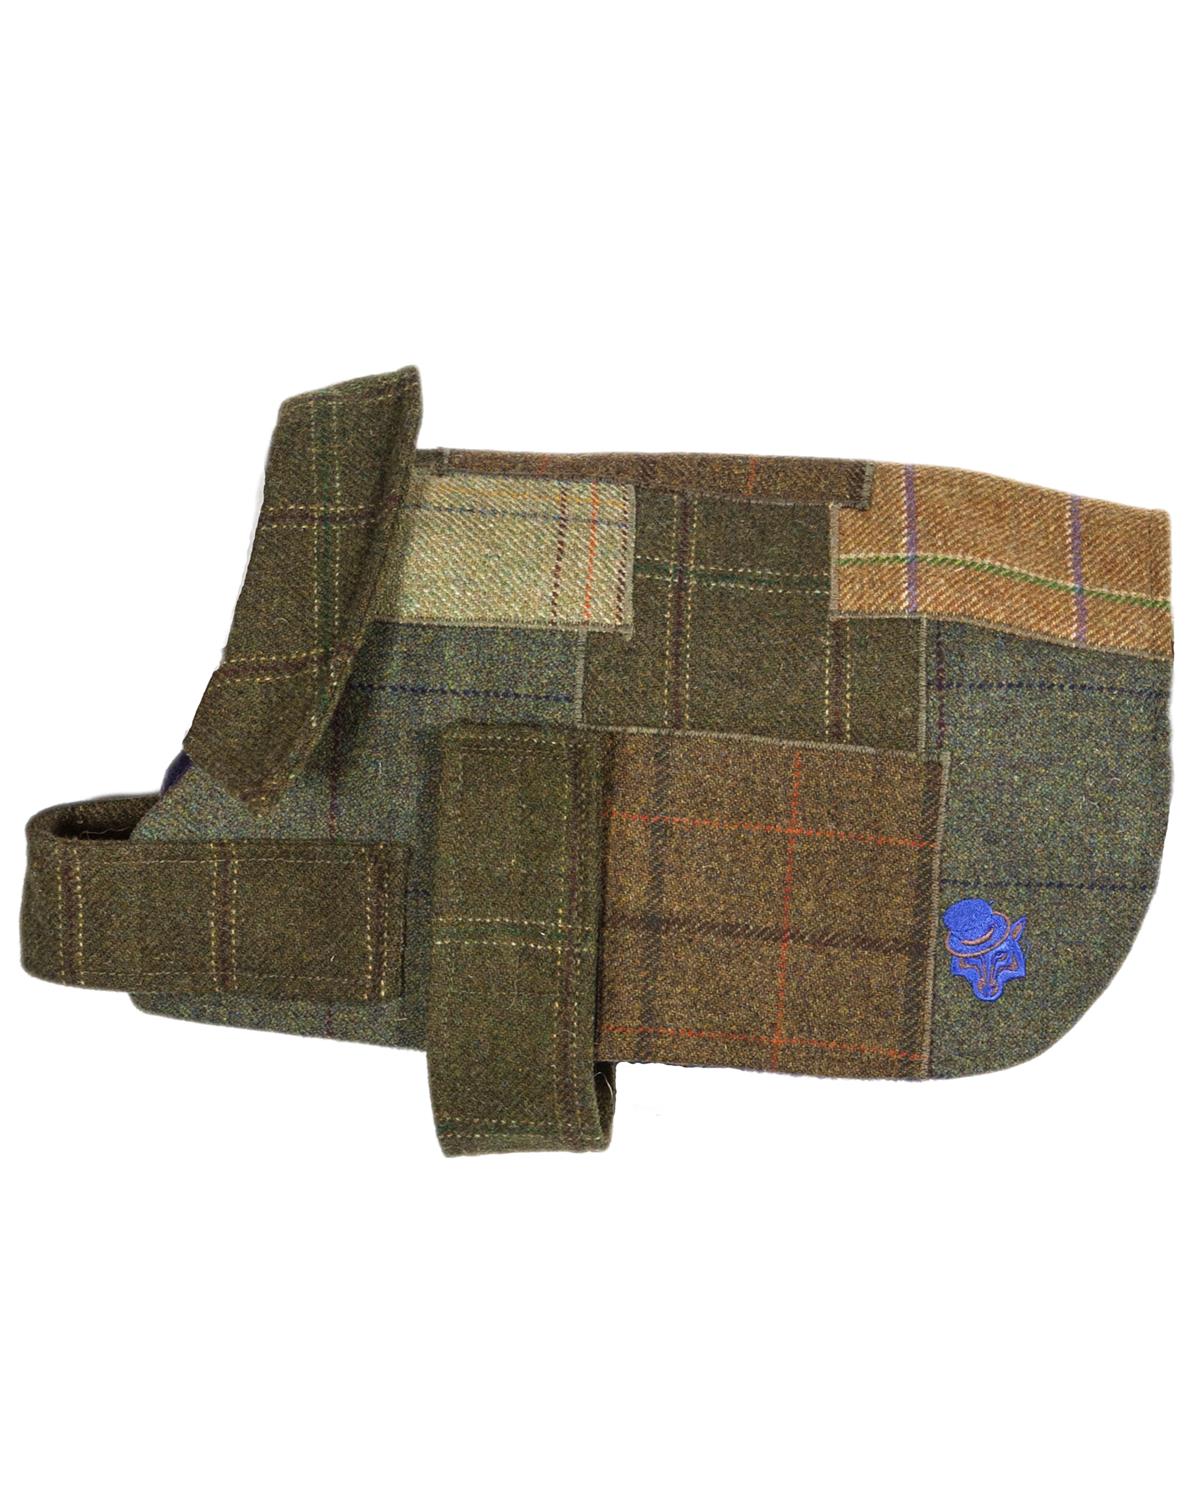 The Cosy - Patch Tweed Dog Coat